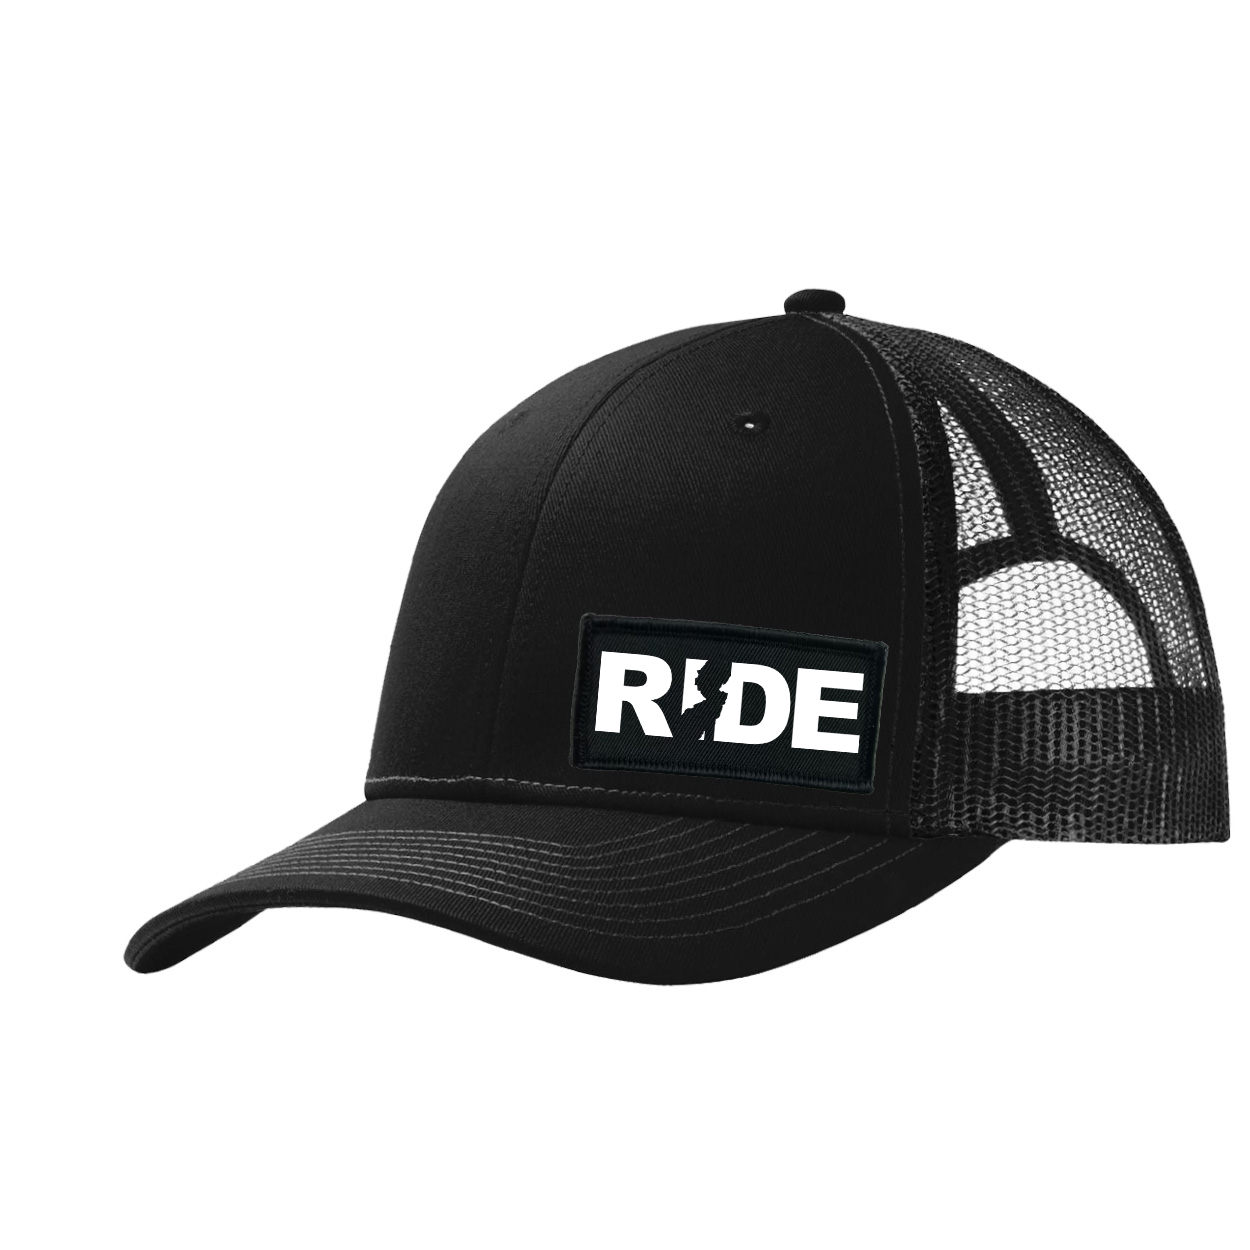 Ride New Jersey Night Out Woven Patch Snapback Trucker Hat Black (White Logo)